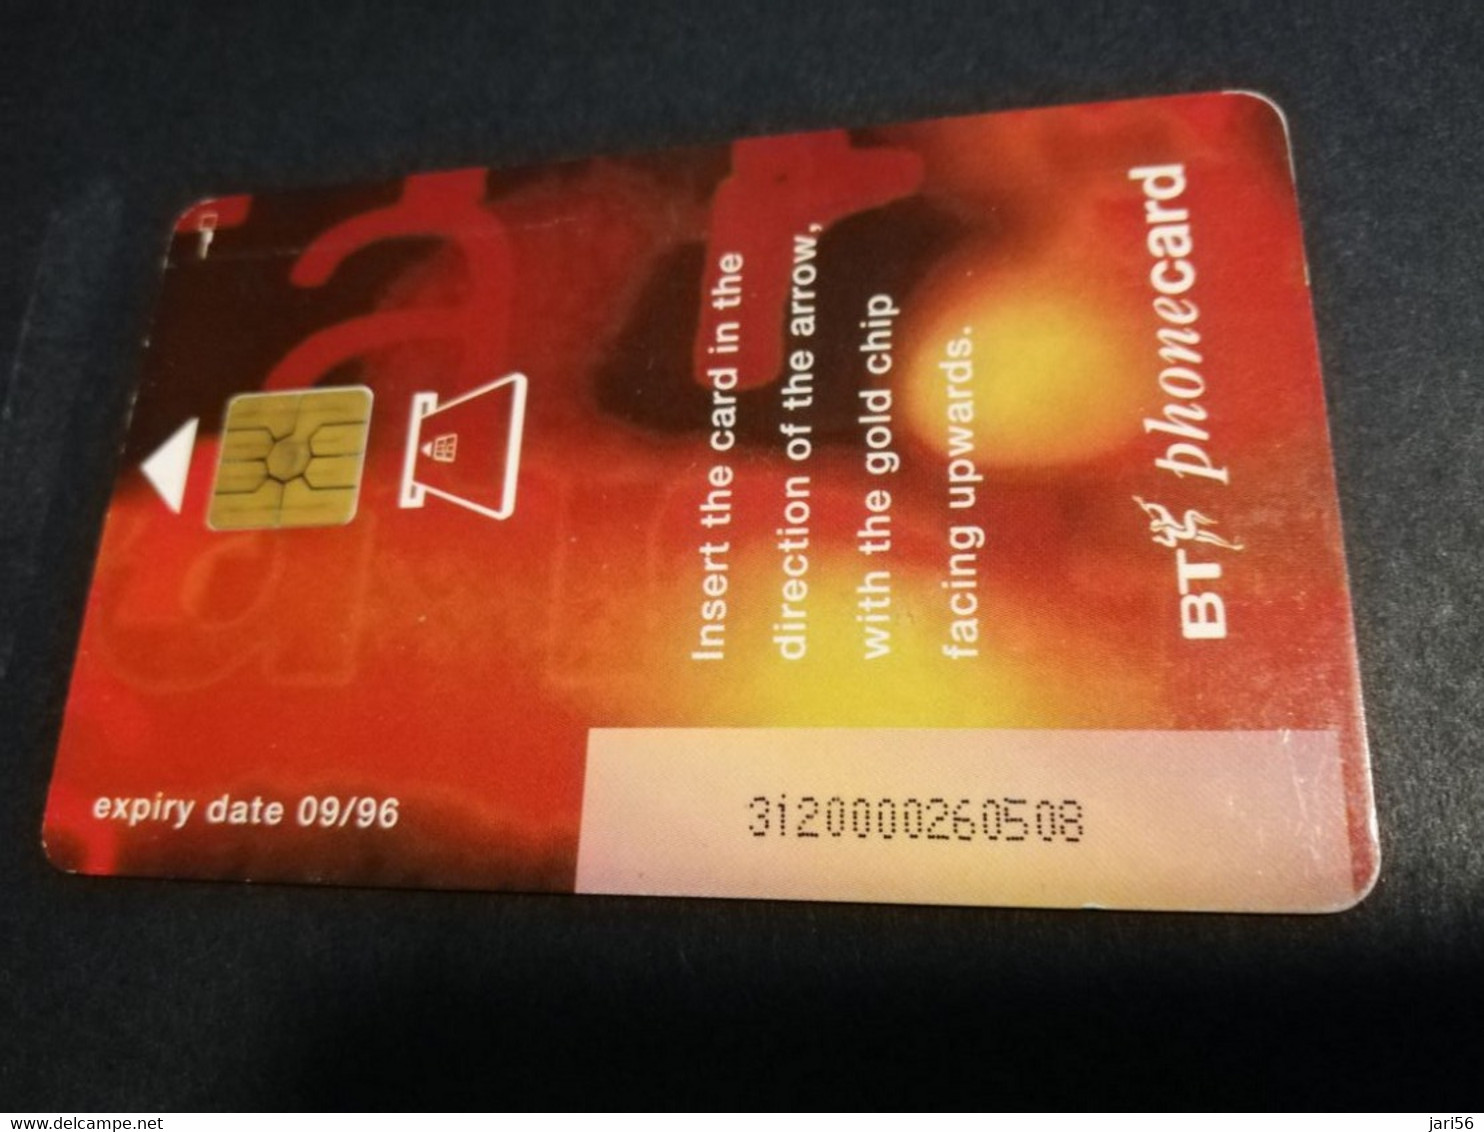 GREAT BRETAGNE  CHIPCARDS / TEST CARD 10 POUND    EXPIRY DATE 09/96   PERFECT  CONDITION     **4597** - BT Algemeen